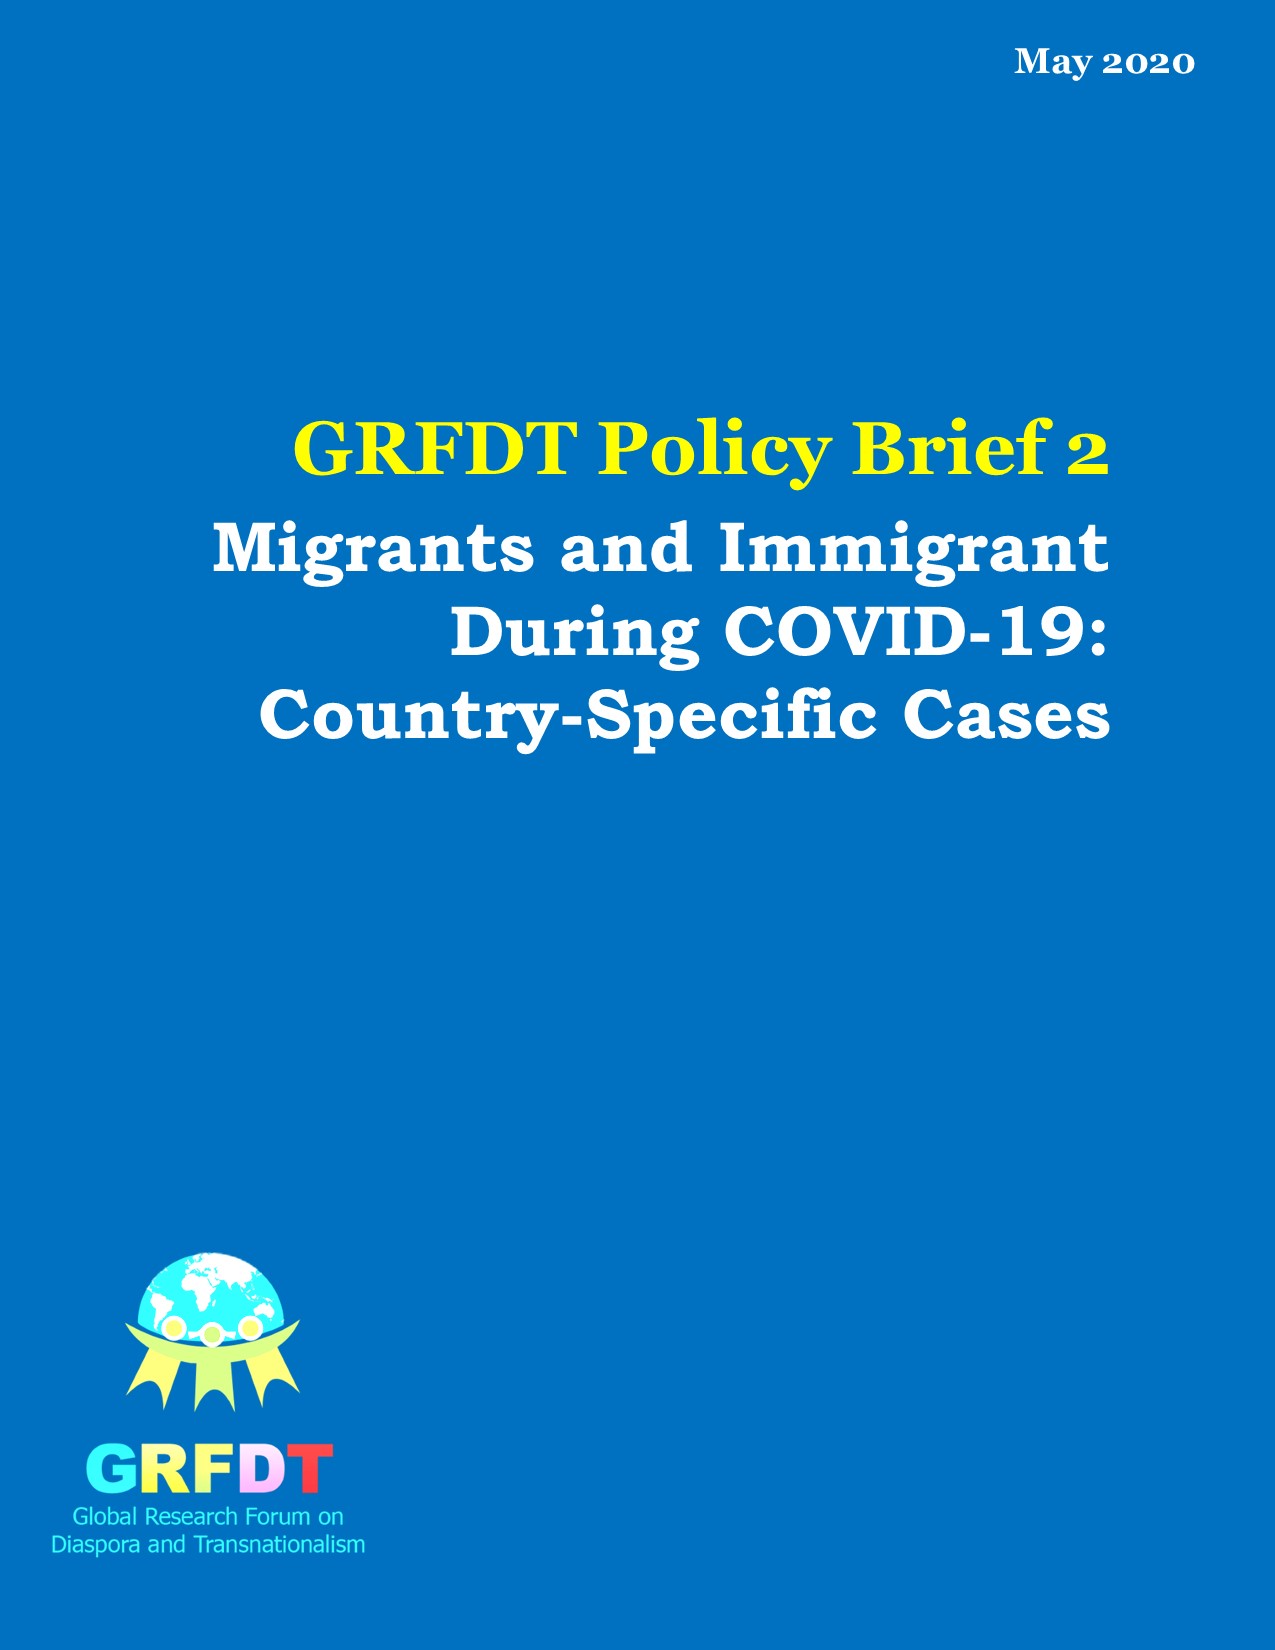 Migrants and Immigrant During COVID-19: Country-Specific Cases